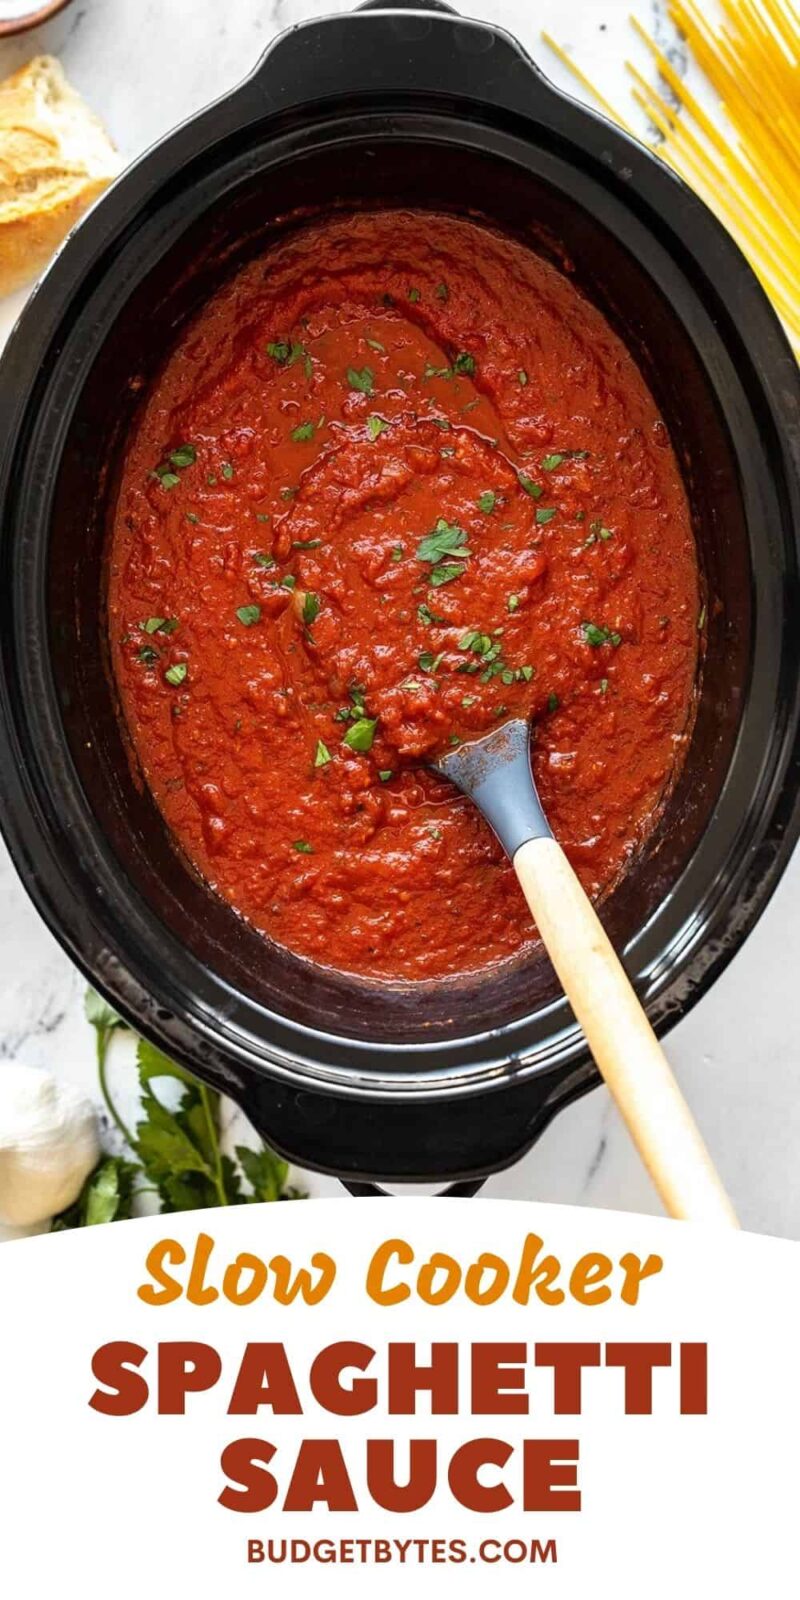 spaghetti sauce in the slow cooker, title text at the bottom